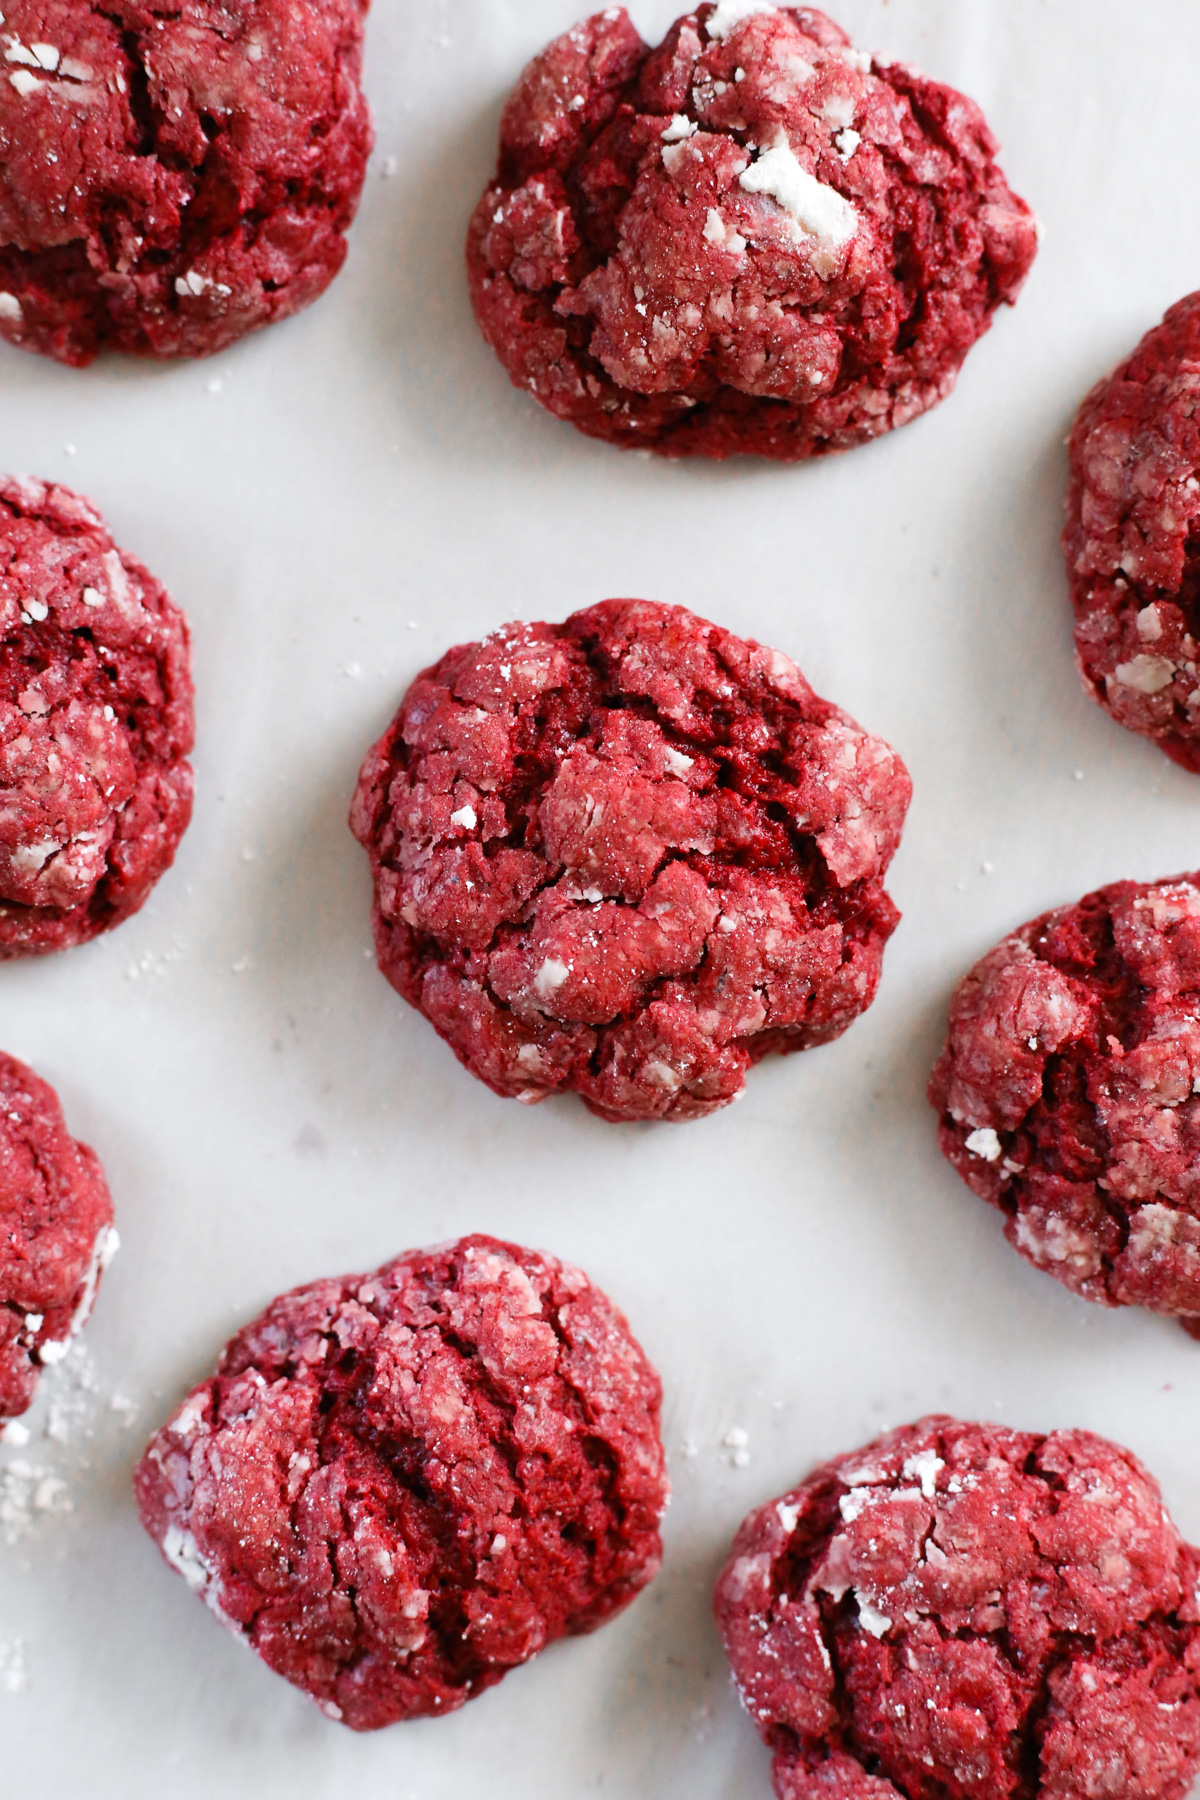 Bright red cookies with a cracked exterior and a dusting of powdered sugar are shown on a layer of white parchment paper as if they were freshly baked and just pulled from the oven